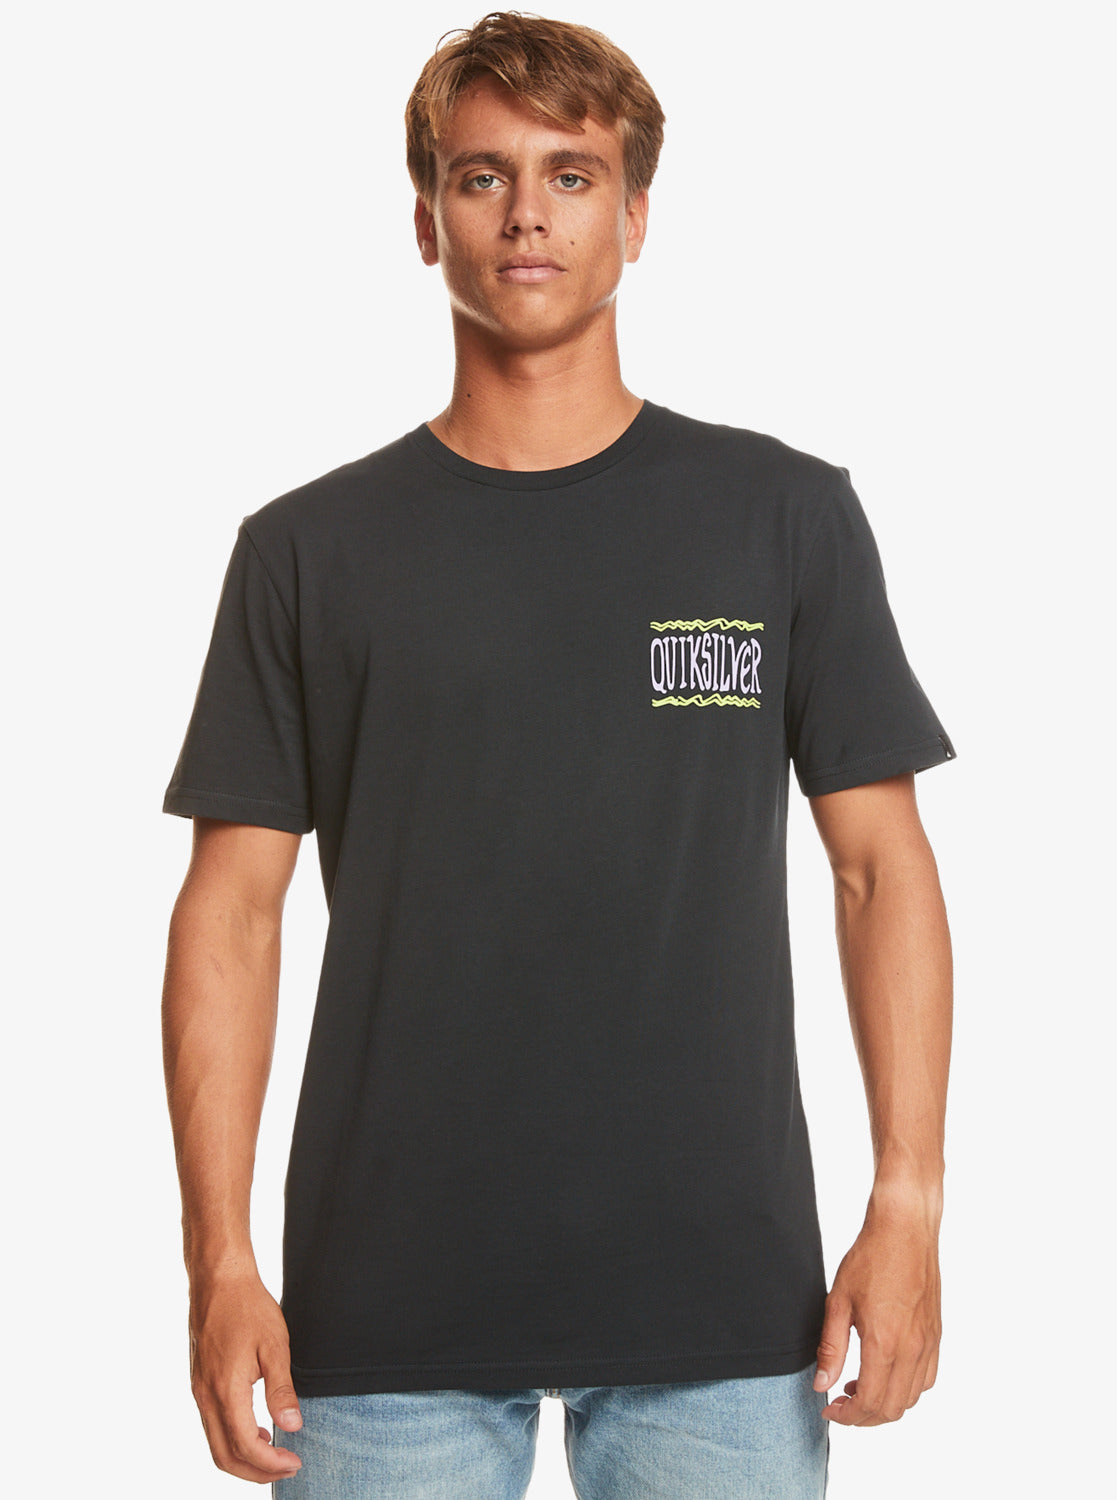 Quicksilver Taking Roots - T-Shirt - Black